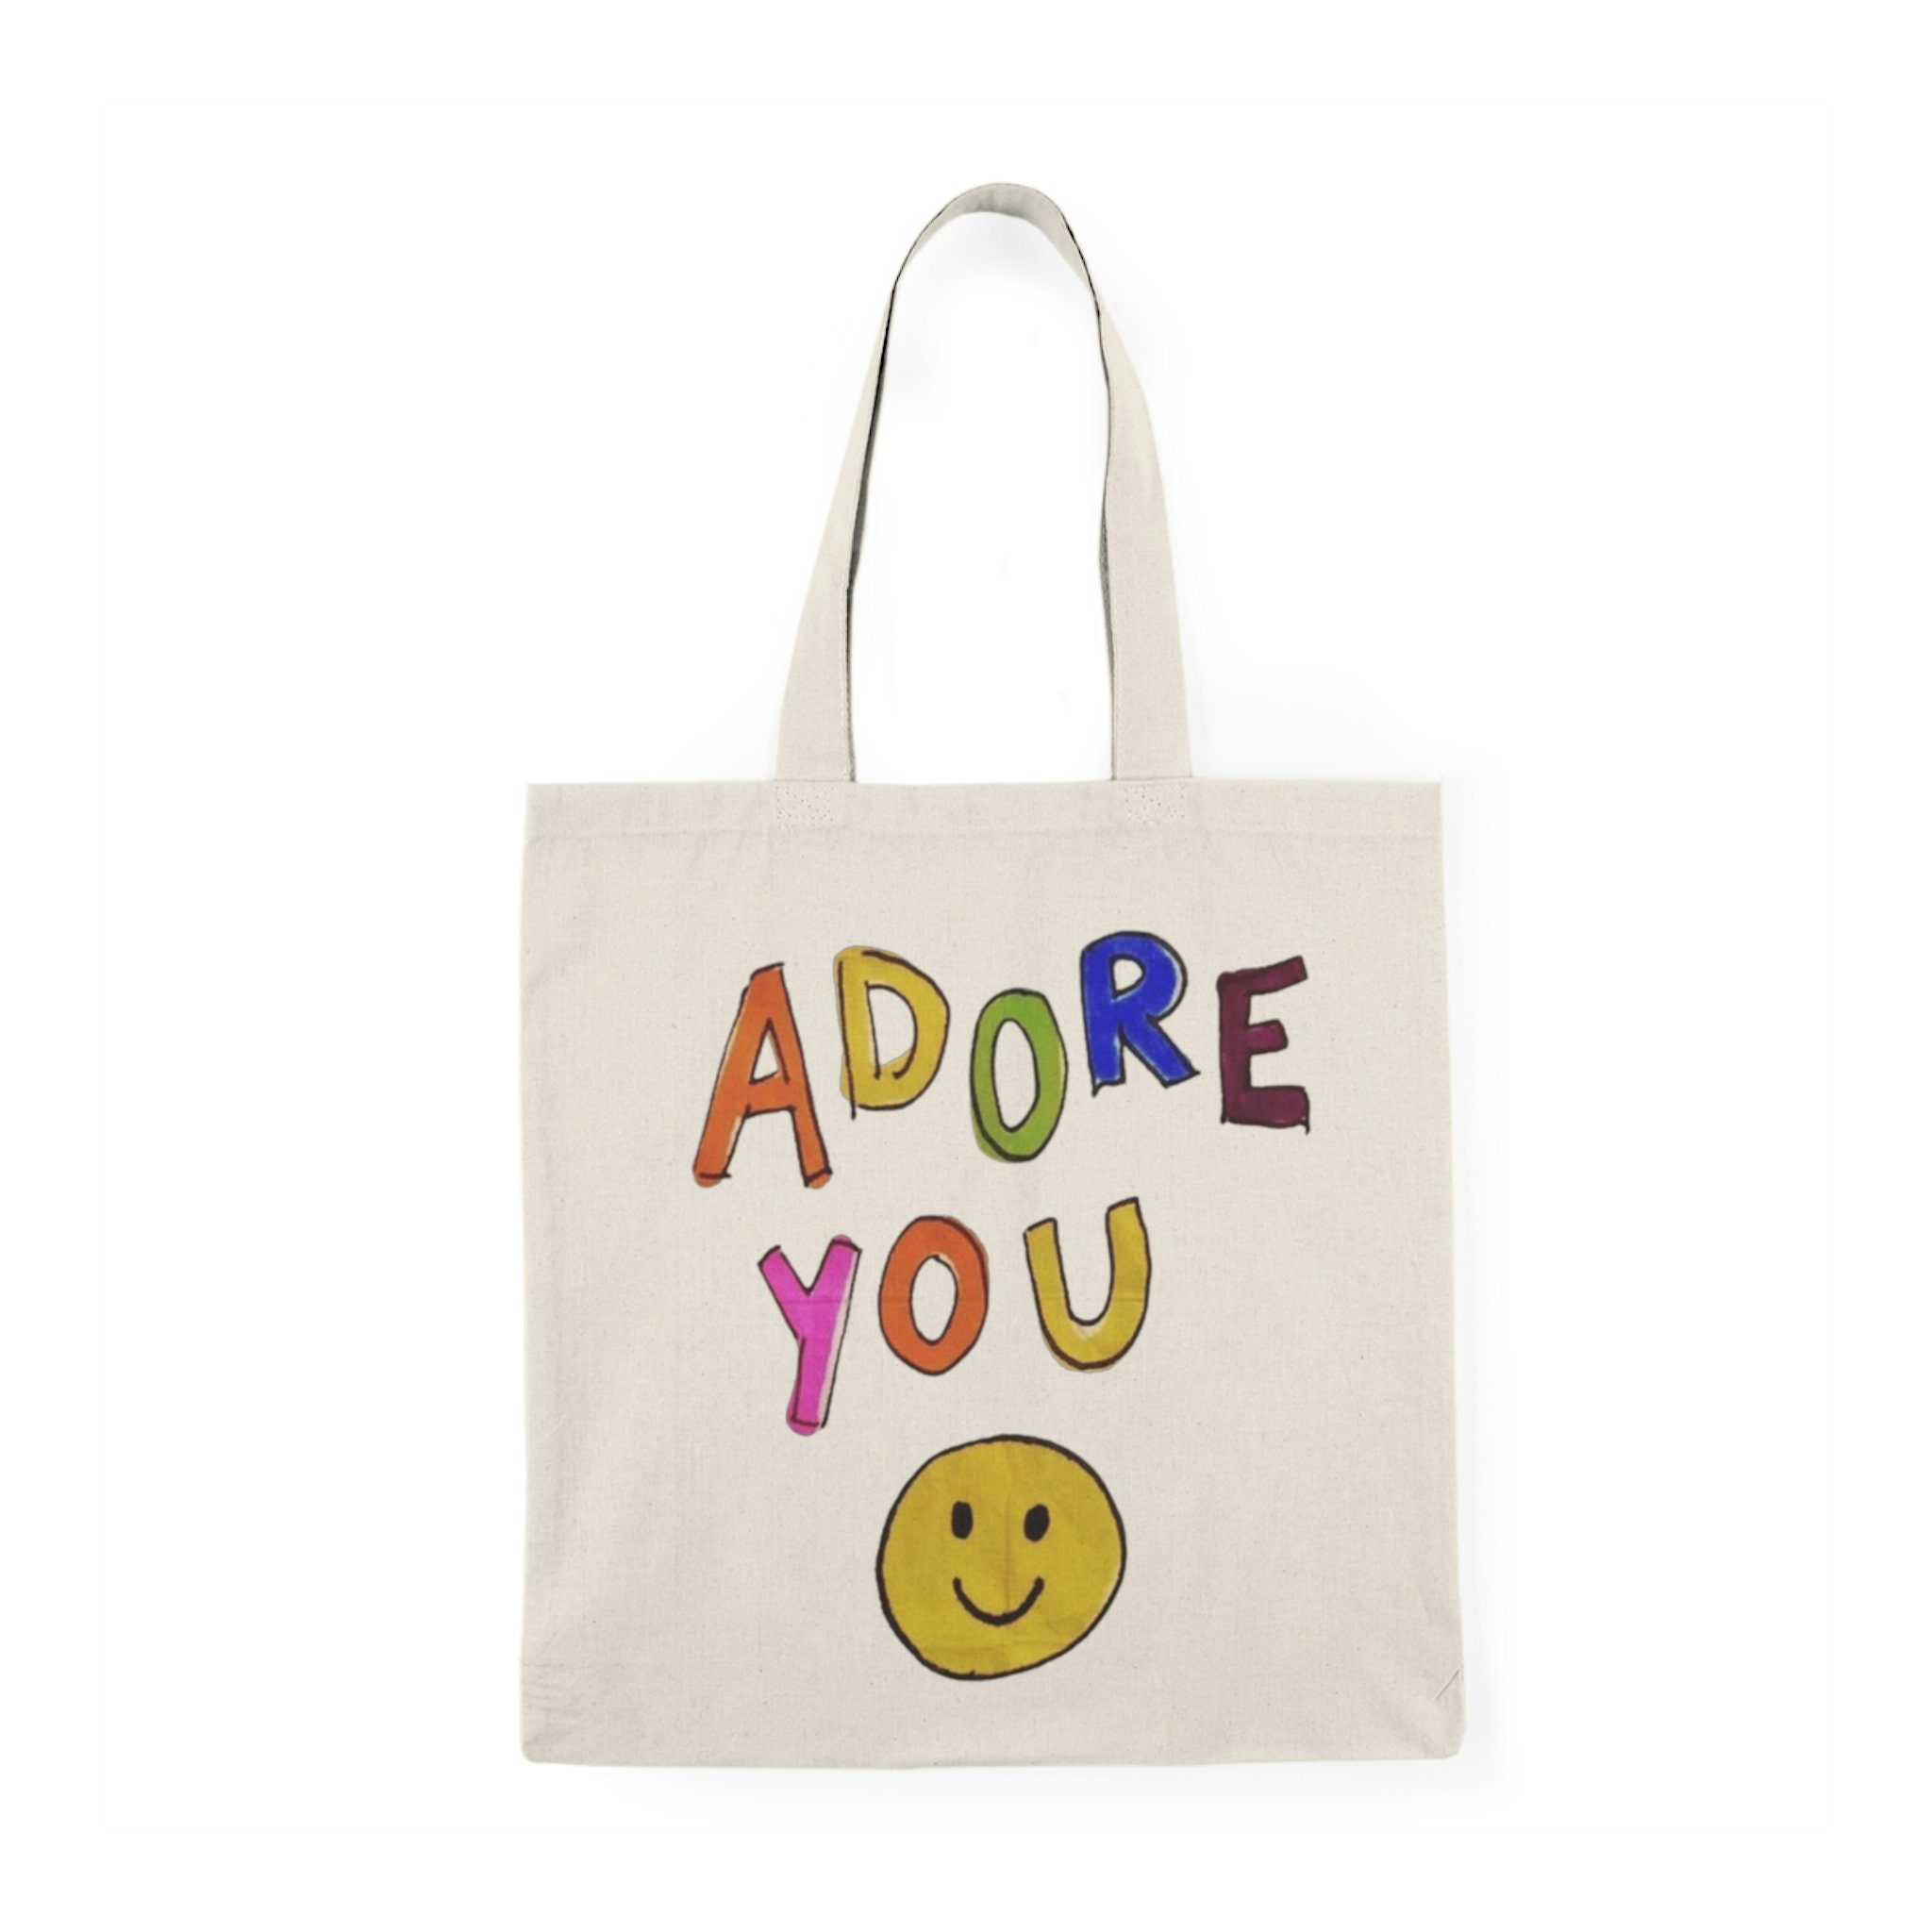 adore you' deluxe tote bag